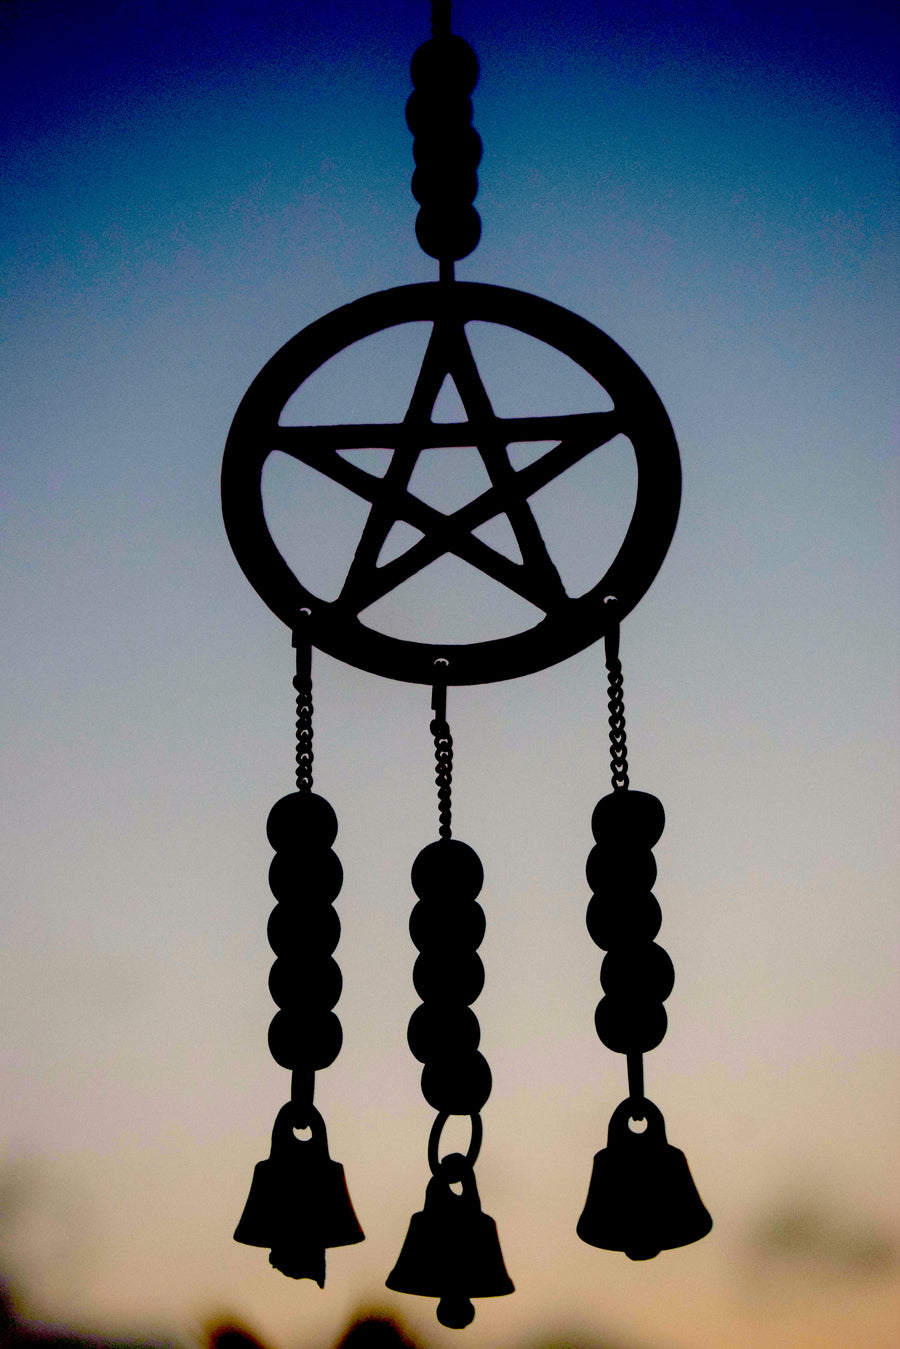 A pentagram bronze metal wind chime with beads and bells hanging in the garden silhouetted against the sky